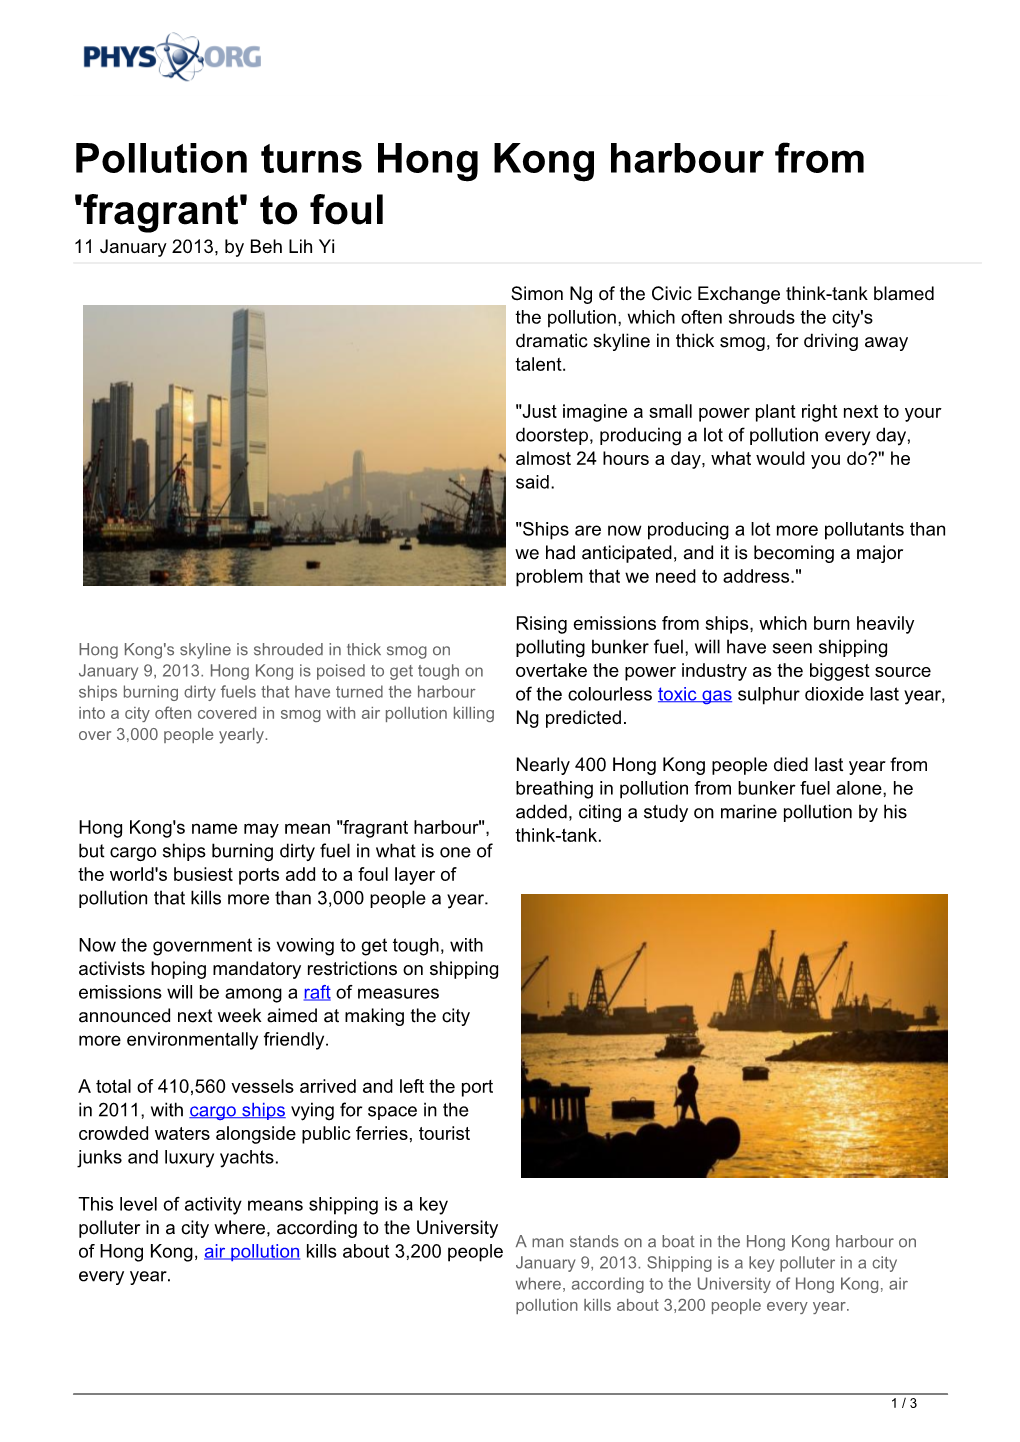 Pollution Turns Hong Kong Harbour from 'Fragrant' to Foul 11 January 2013, by Beh Lih Yi